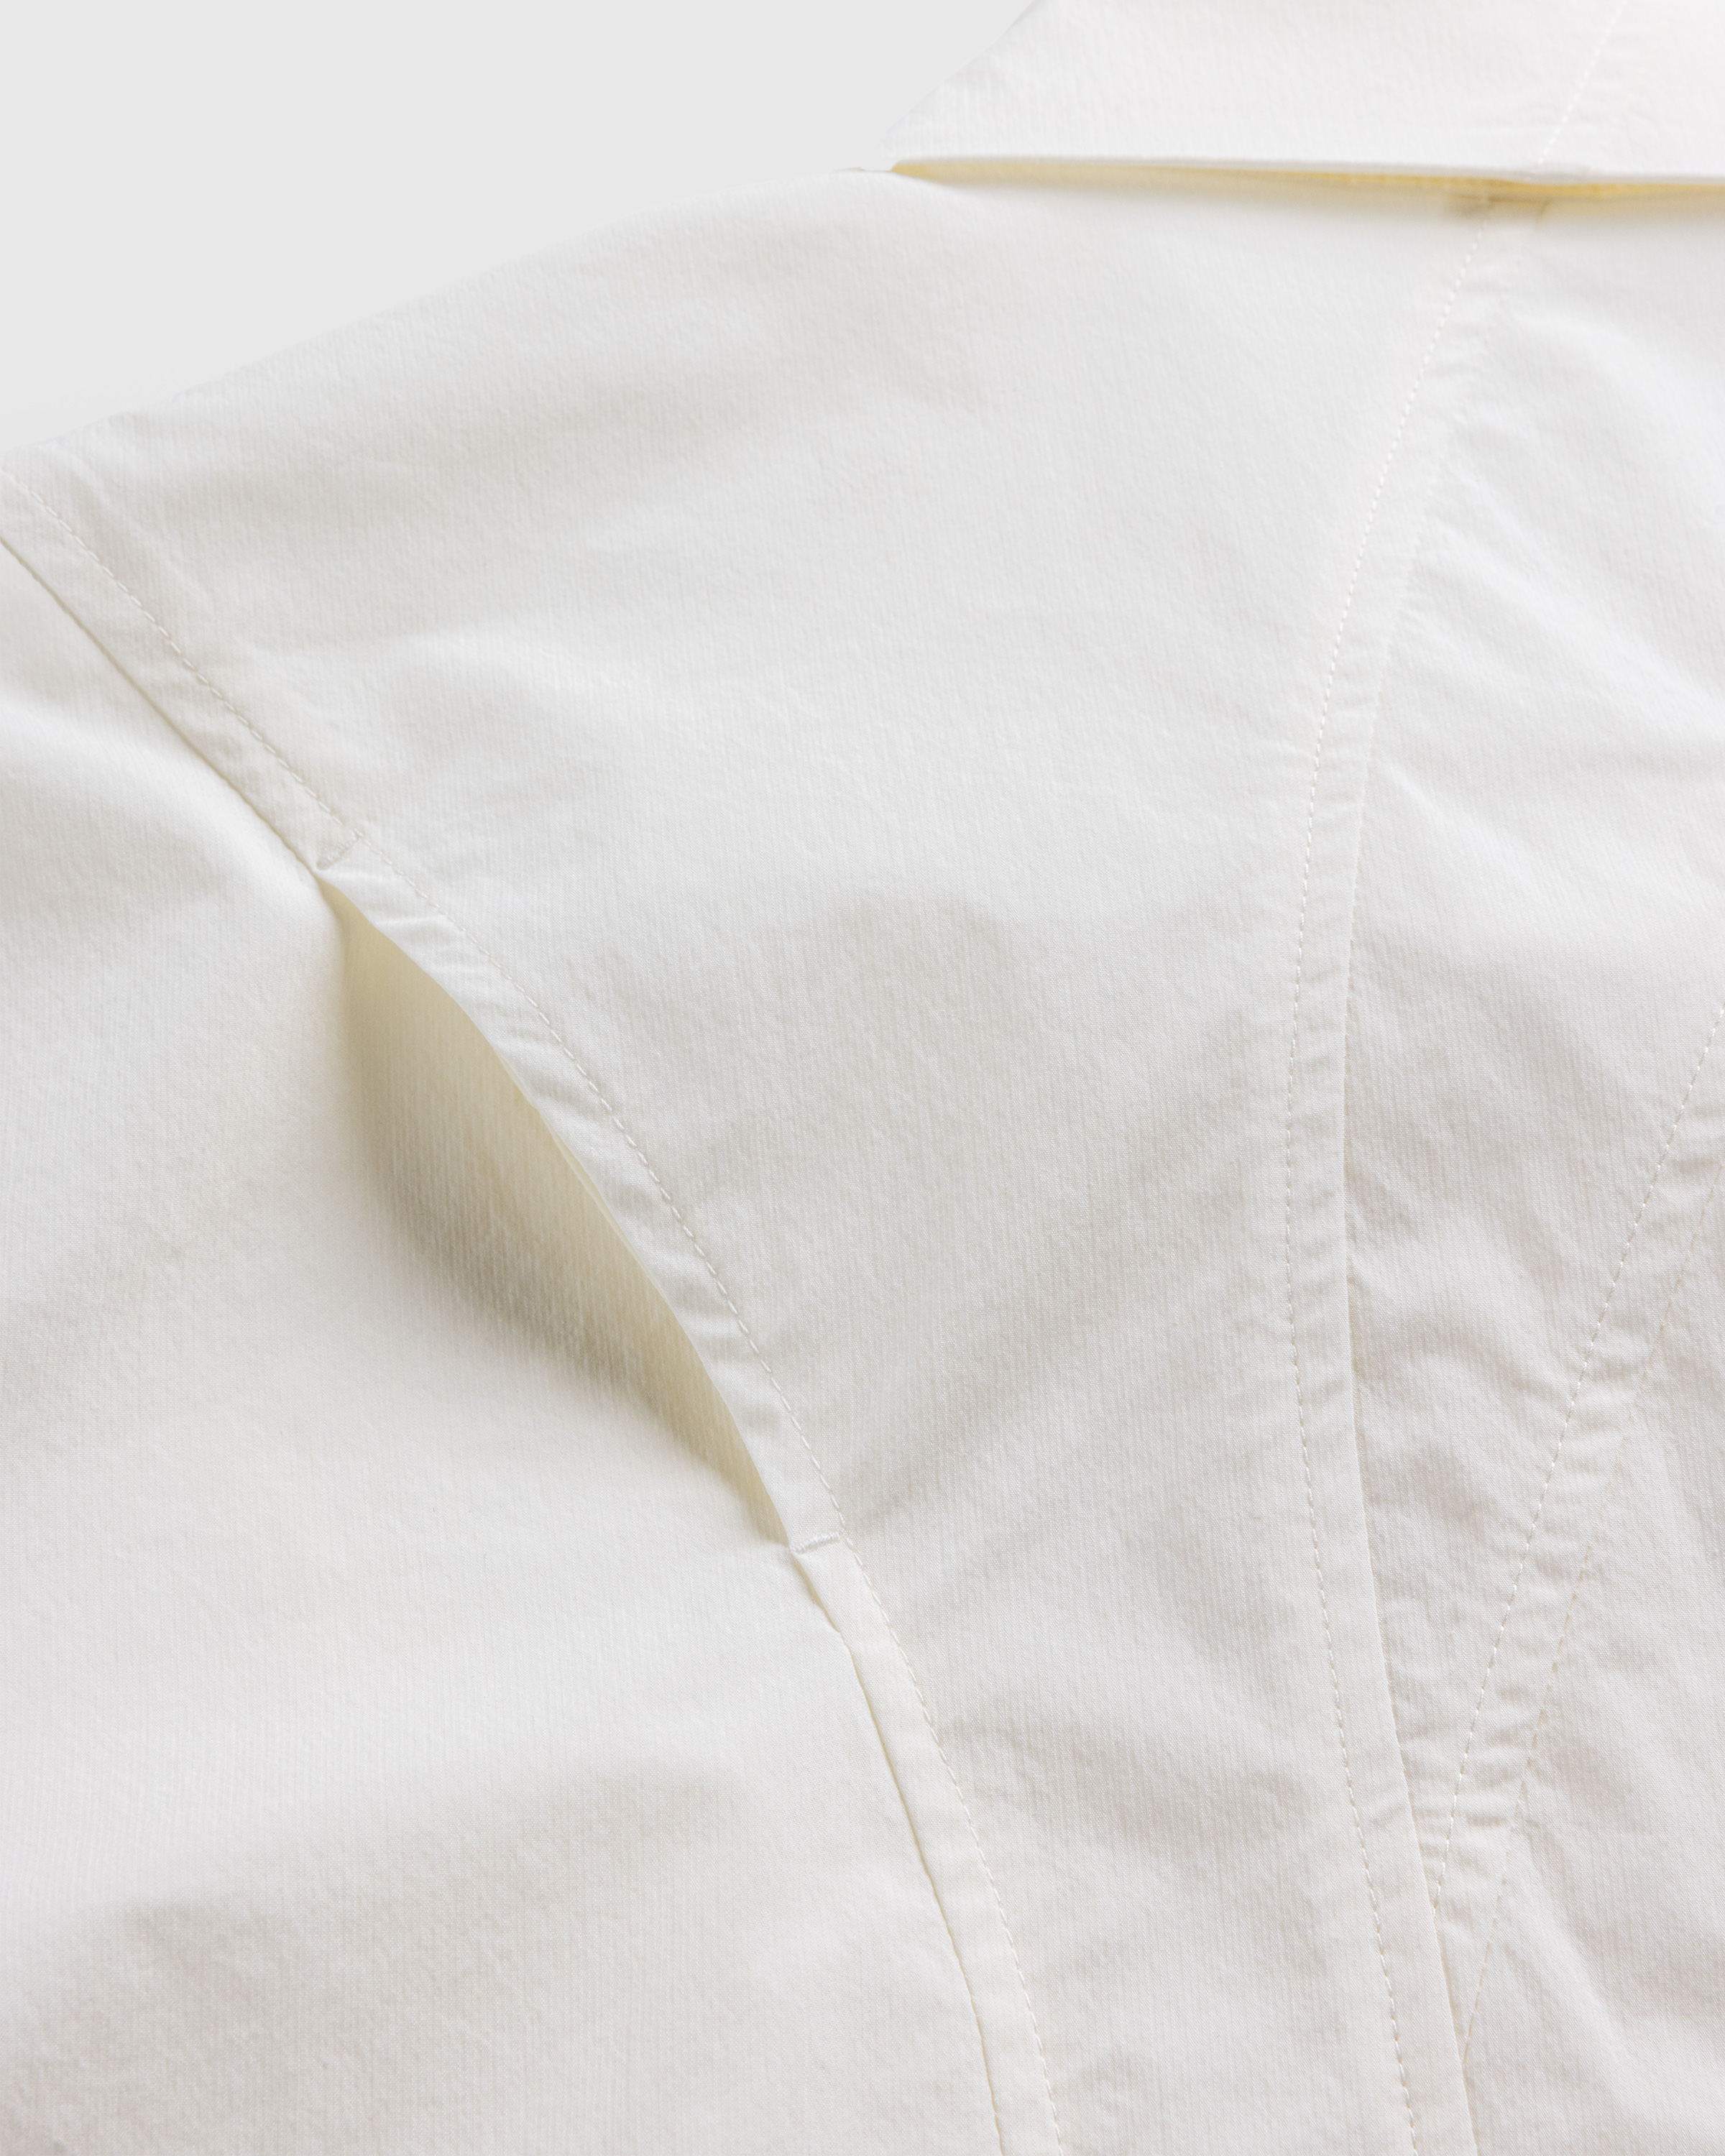 Post Archive Faction (PAF) – 6.0 Shirt Center White - Longsleeve Shirts - White - Image 7